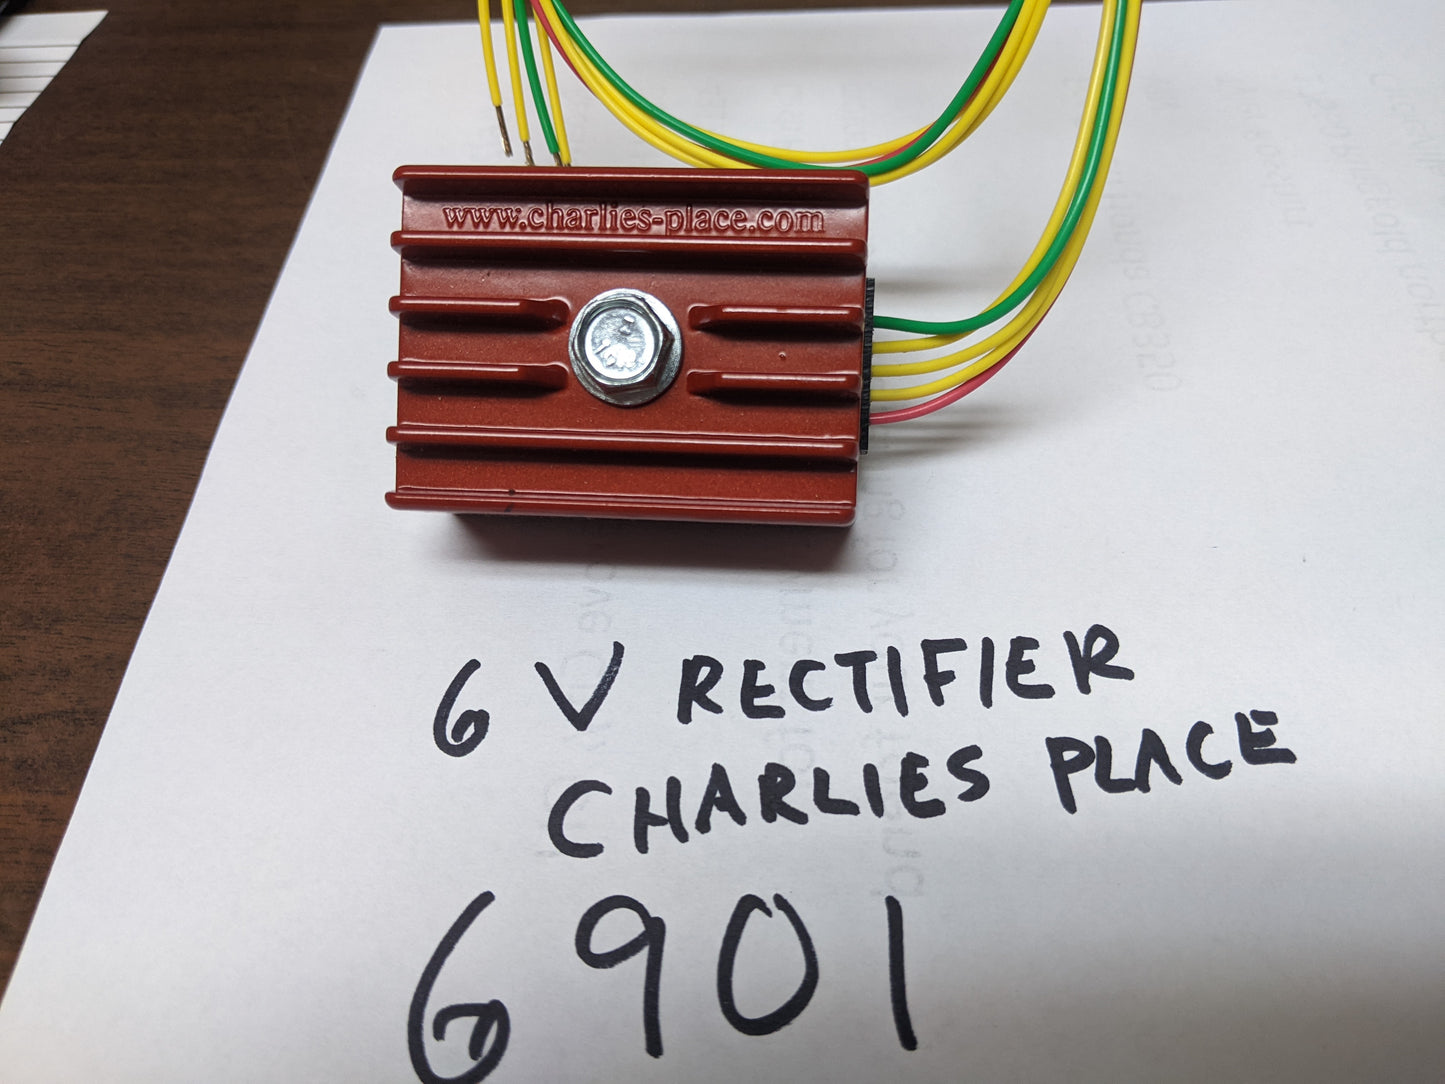 Charlies Place 6 Volt Rectifier New Fits most Honda 6 V Motorcycles sku 6901